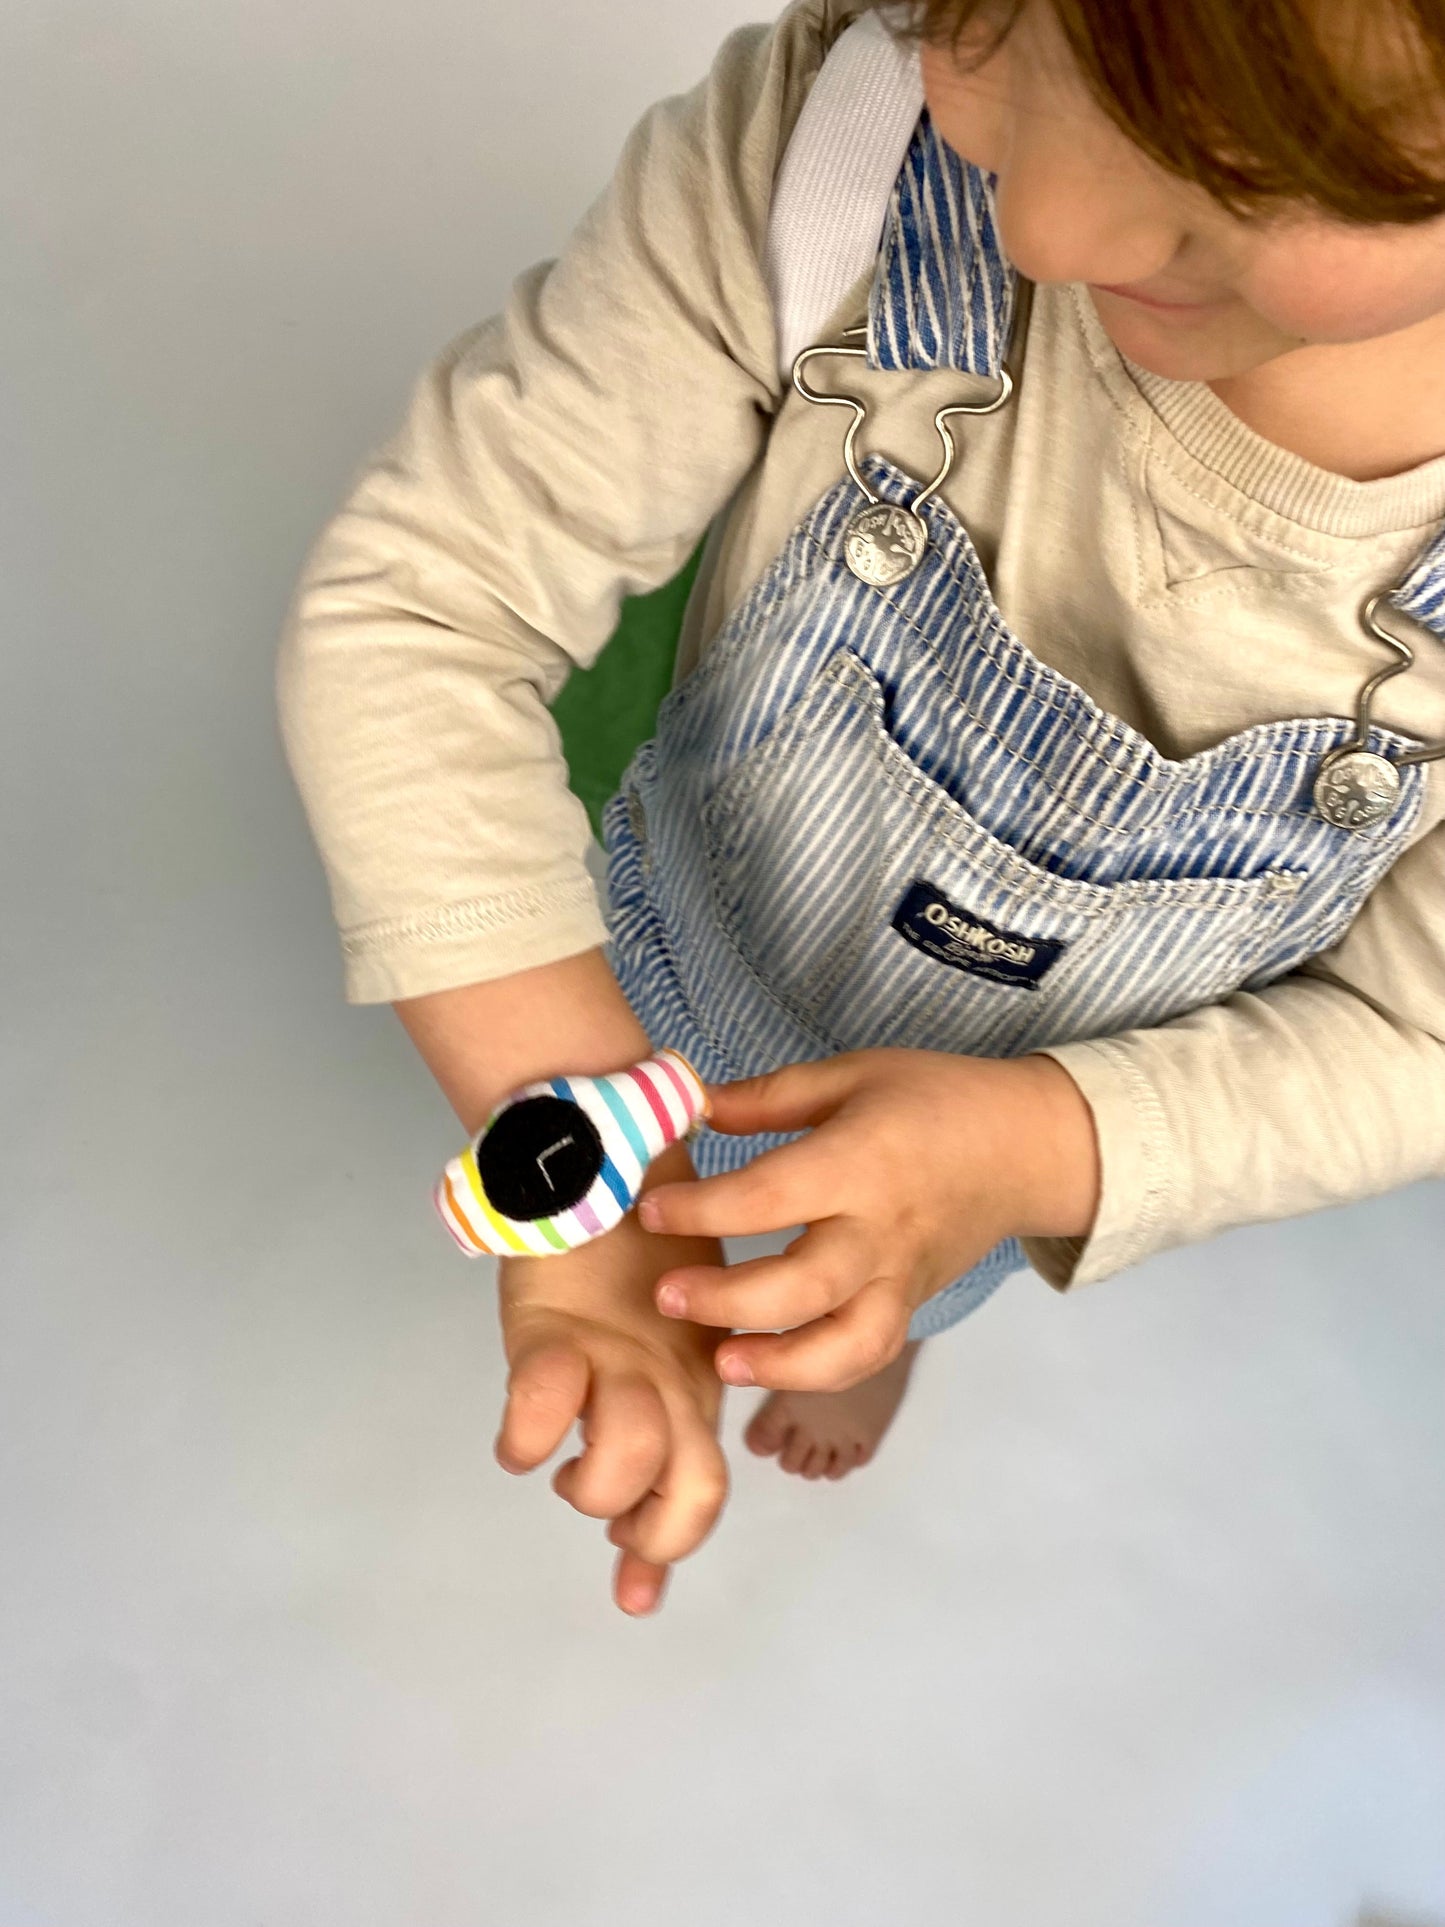 Toddler reads time on toy plush rainbow watch.